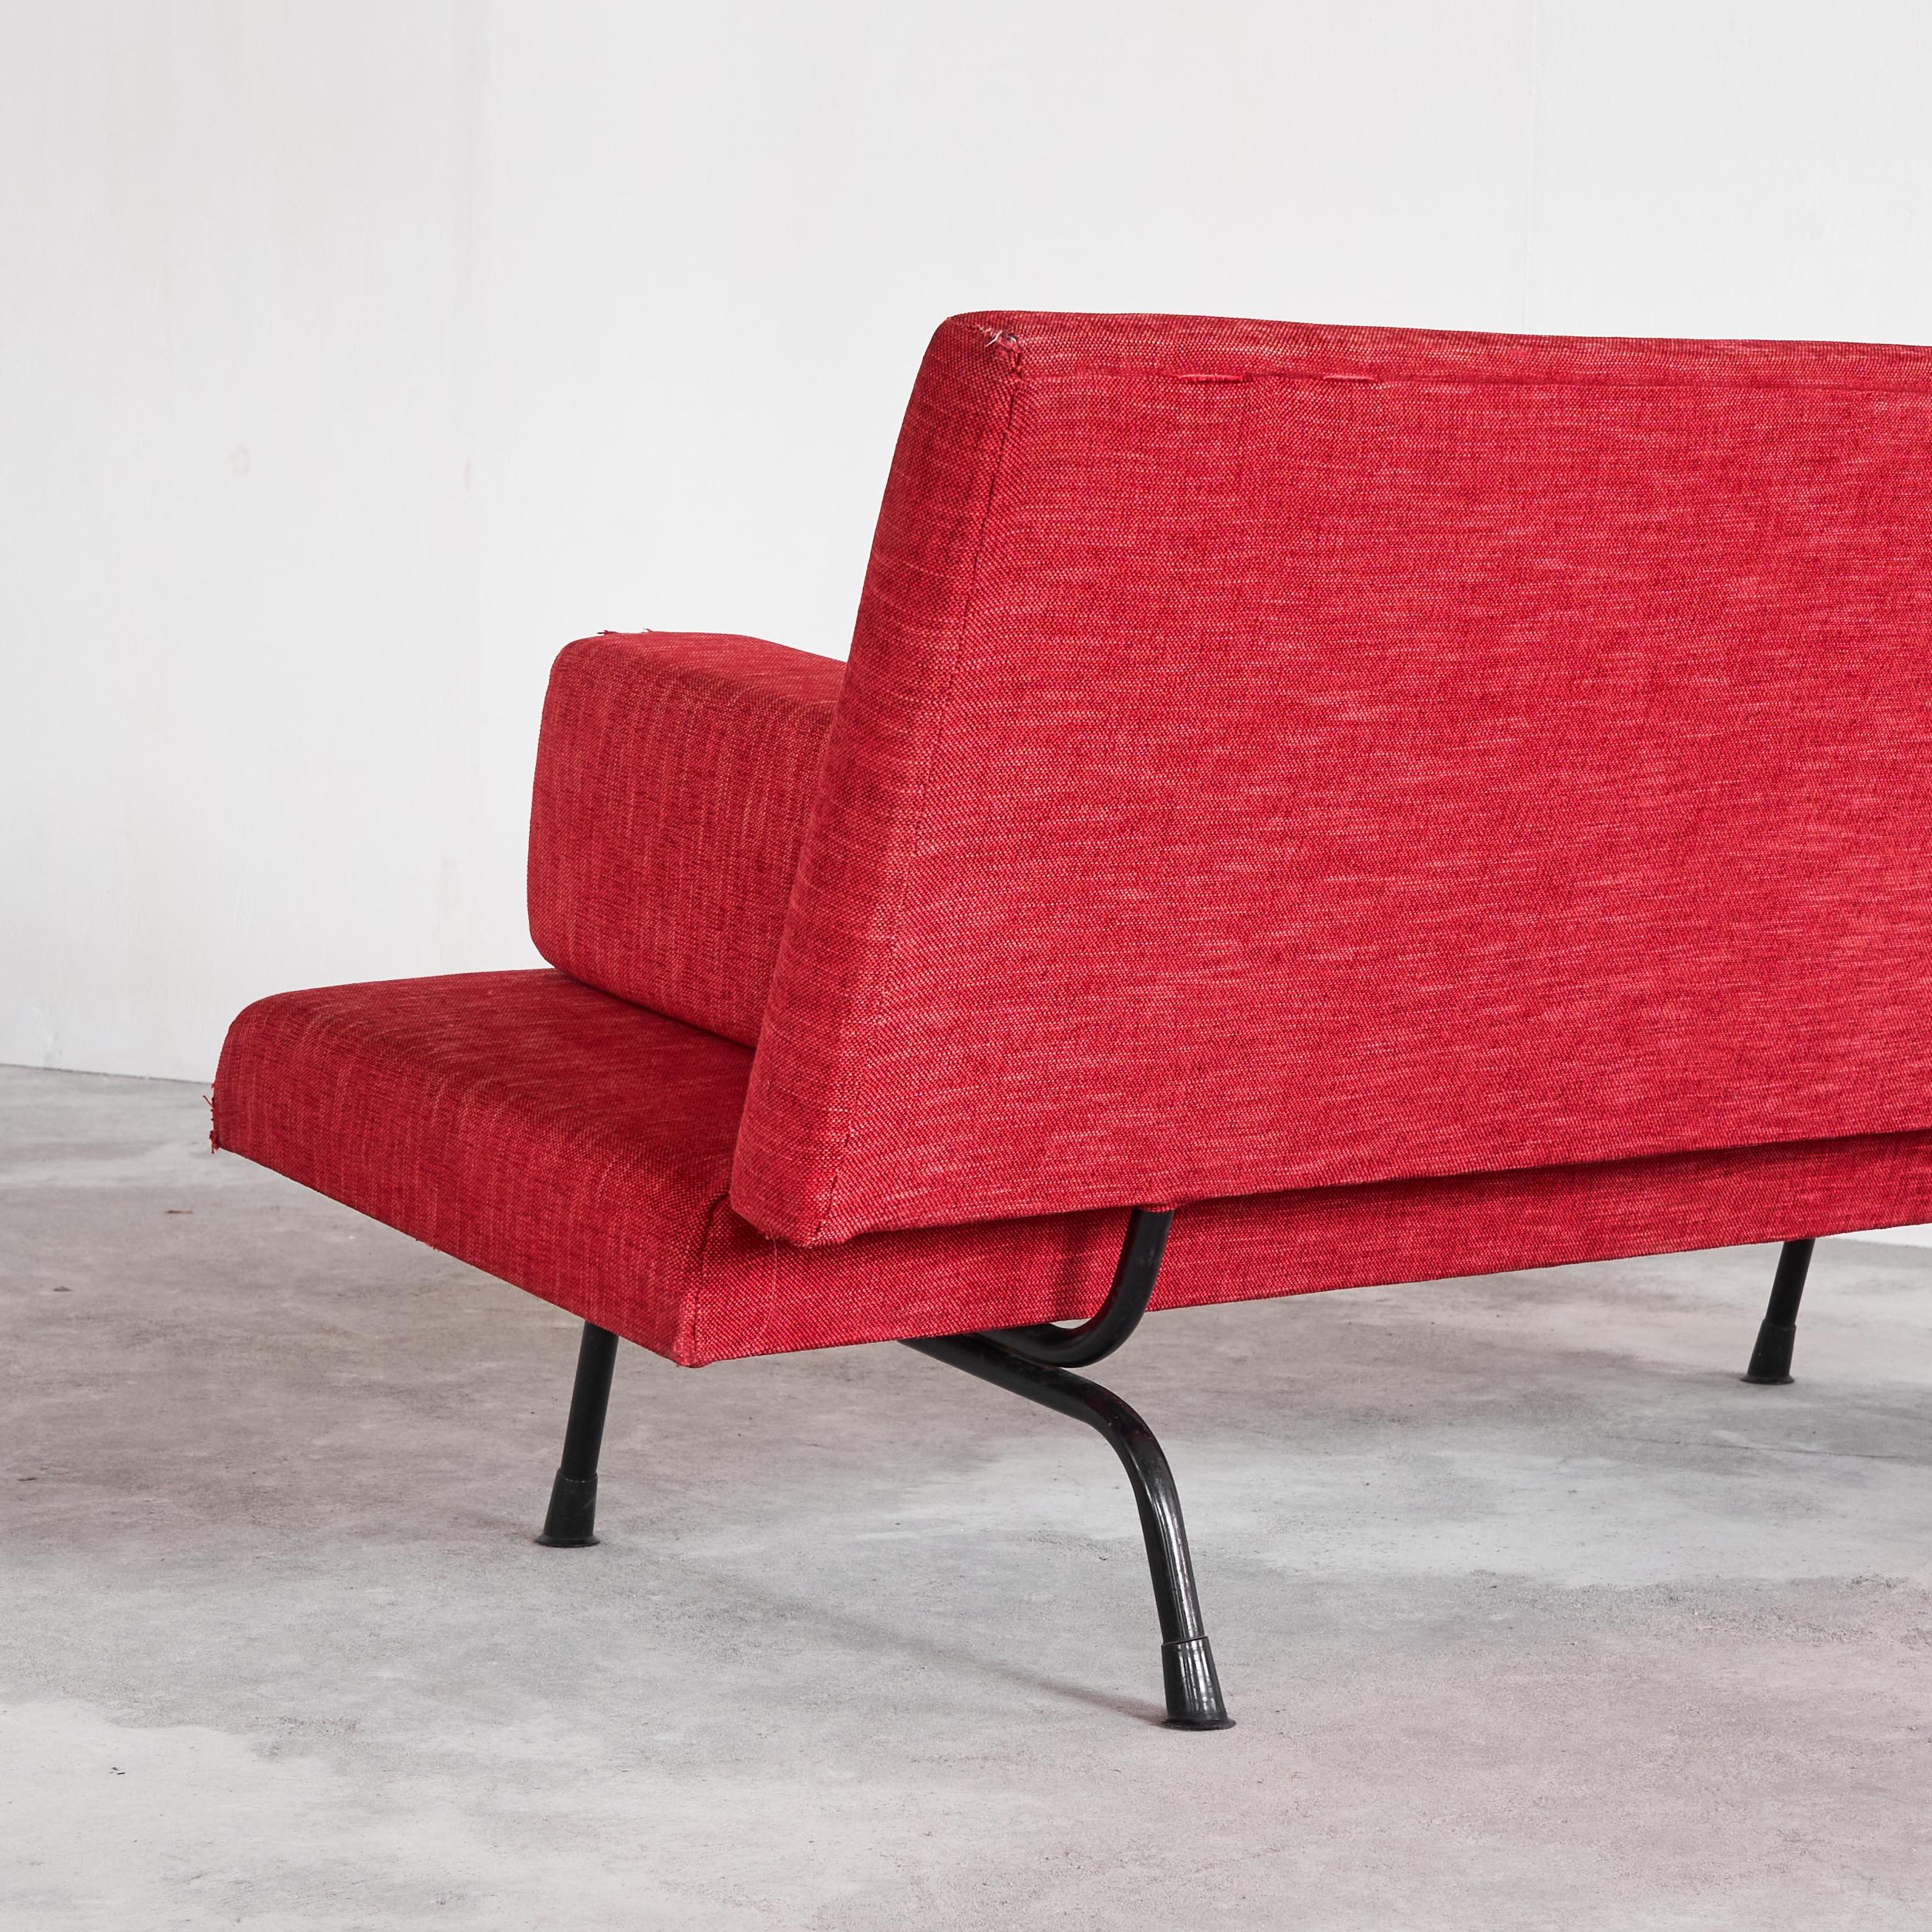 Wim Rietveld '447' Sofa in Red Fabric 1950s For Sale 1